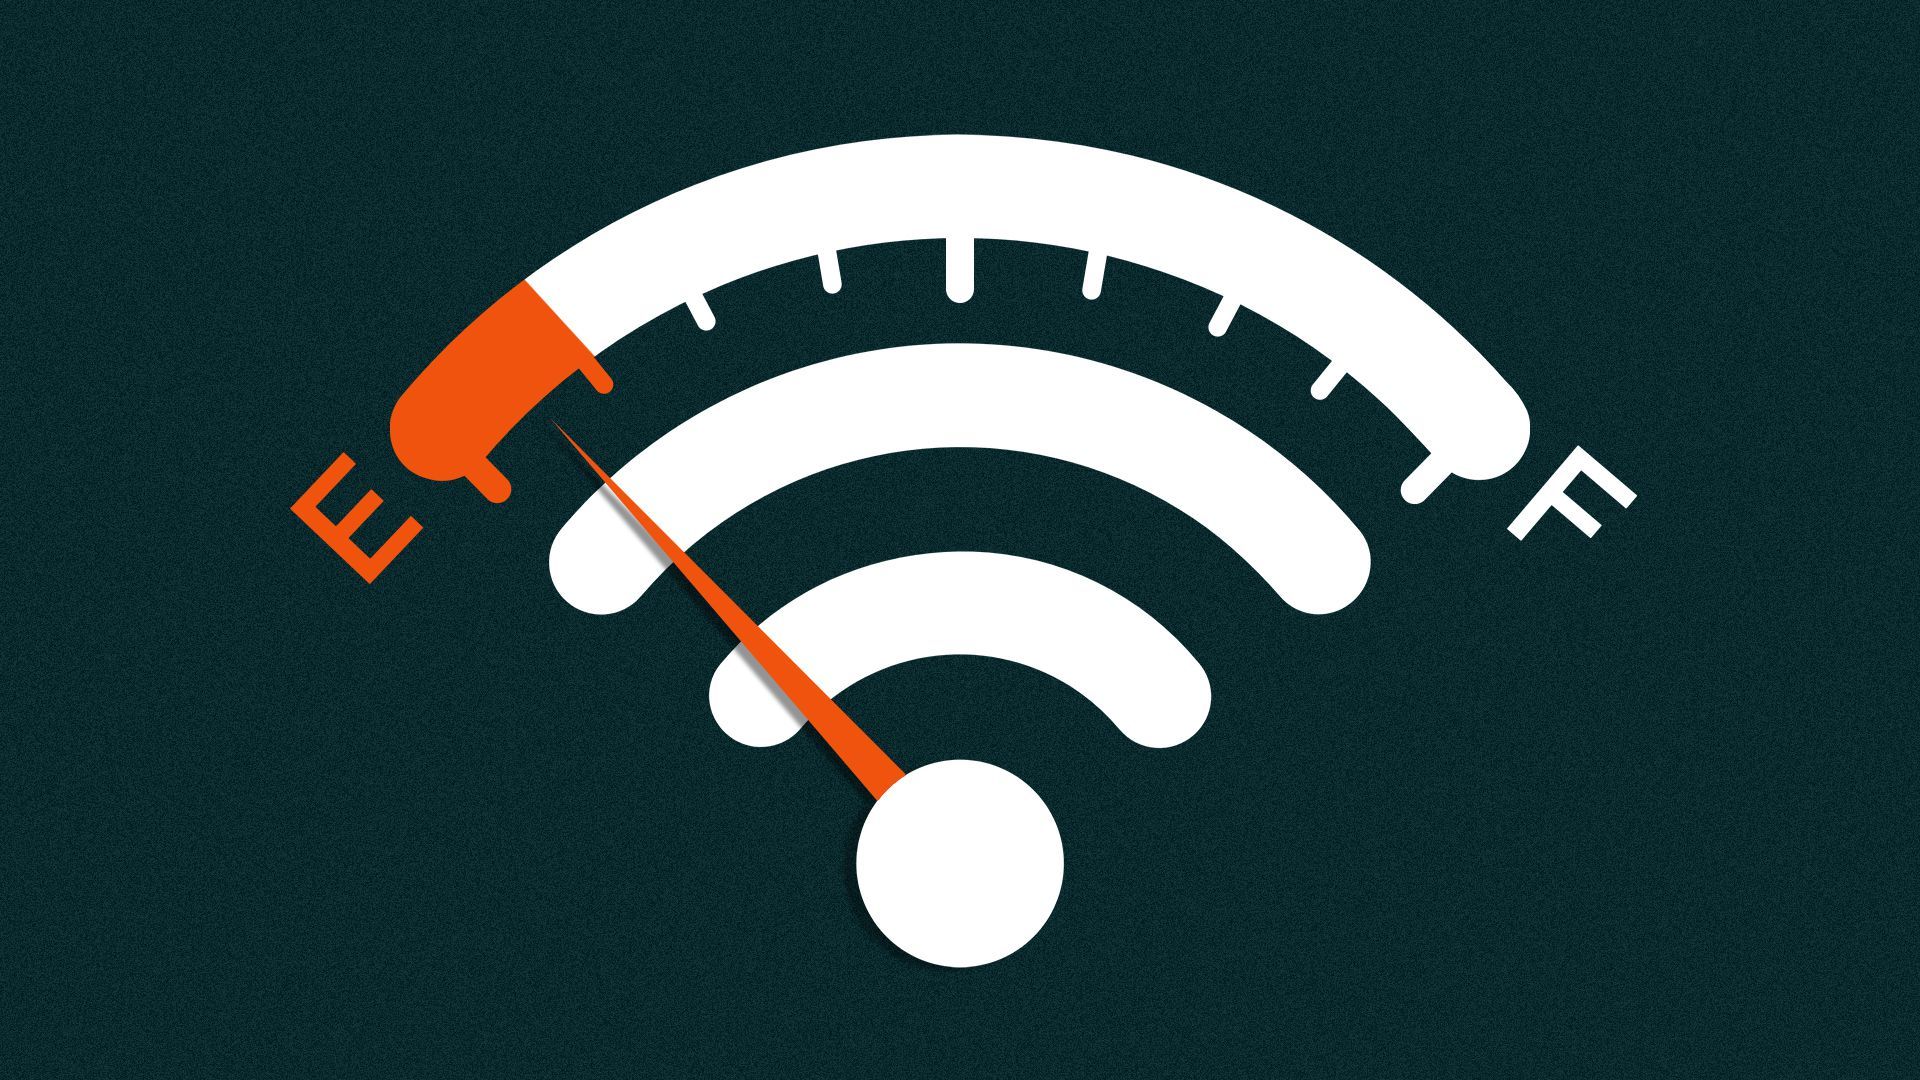 Illustration of a car's gas gage made from a wifi symbol. The needle points to 